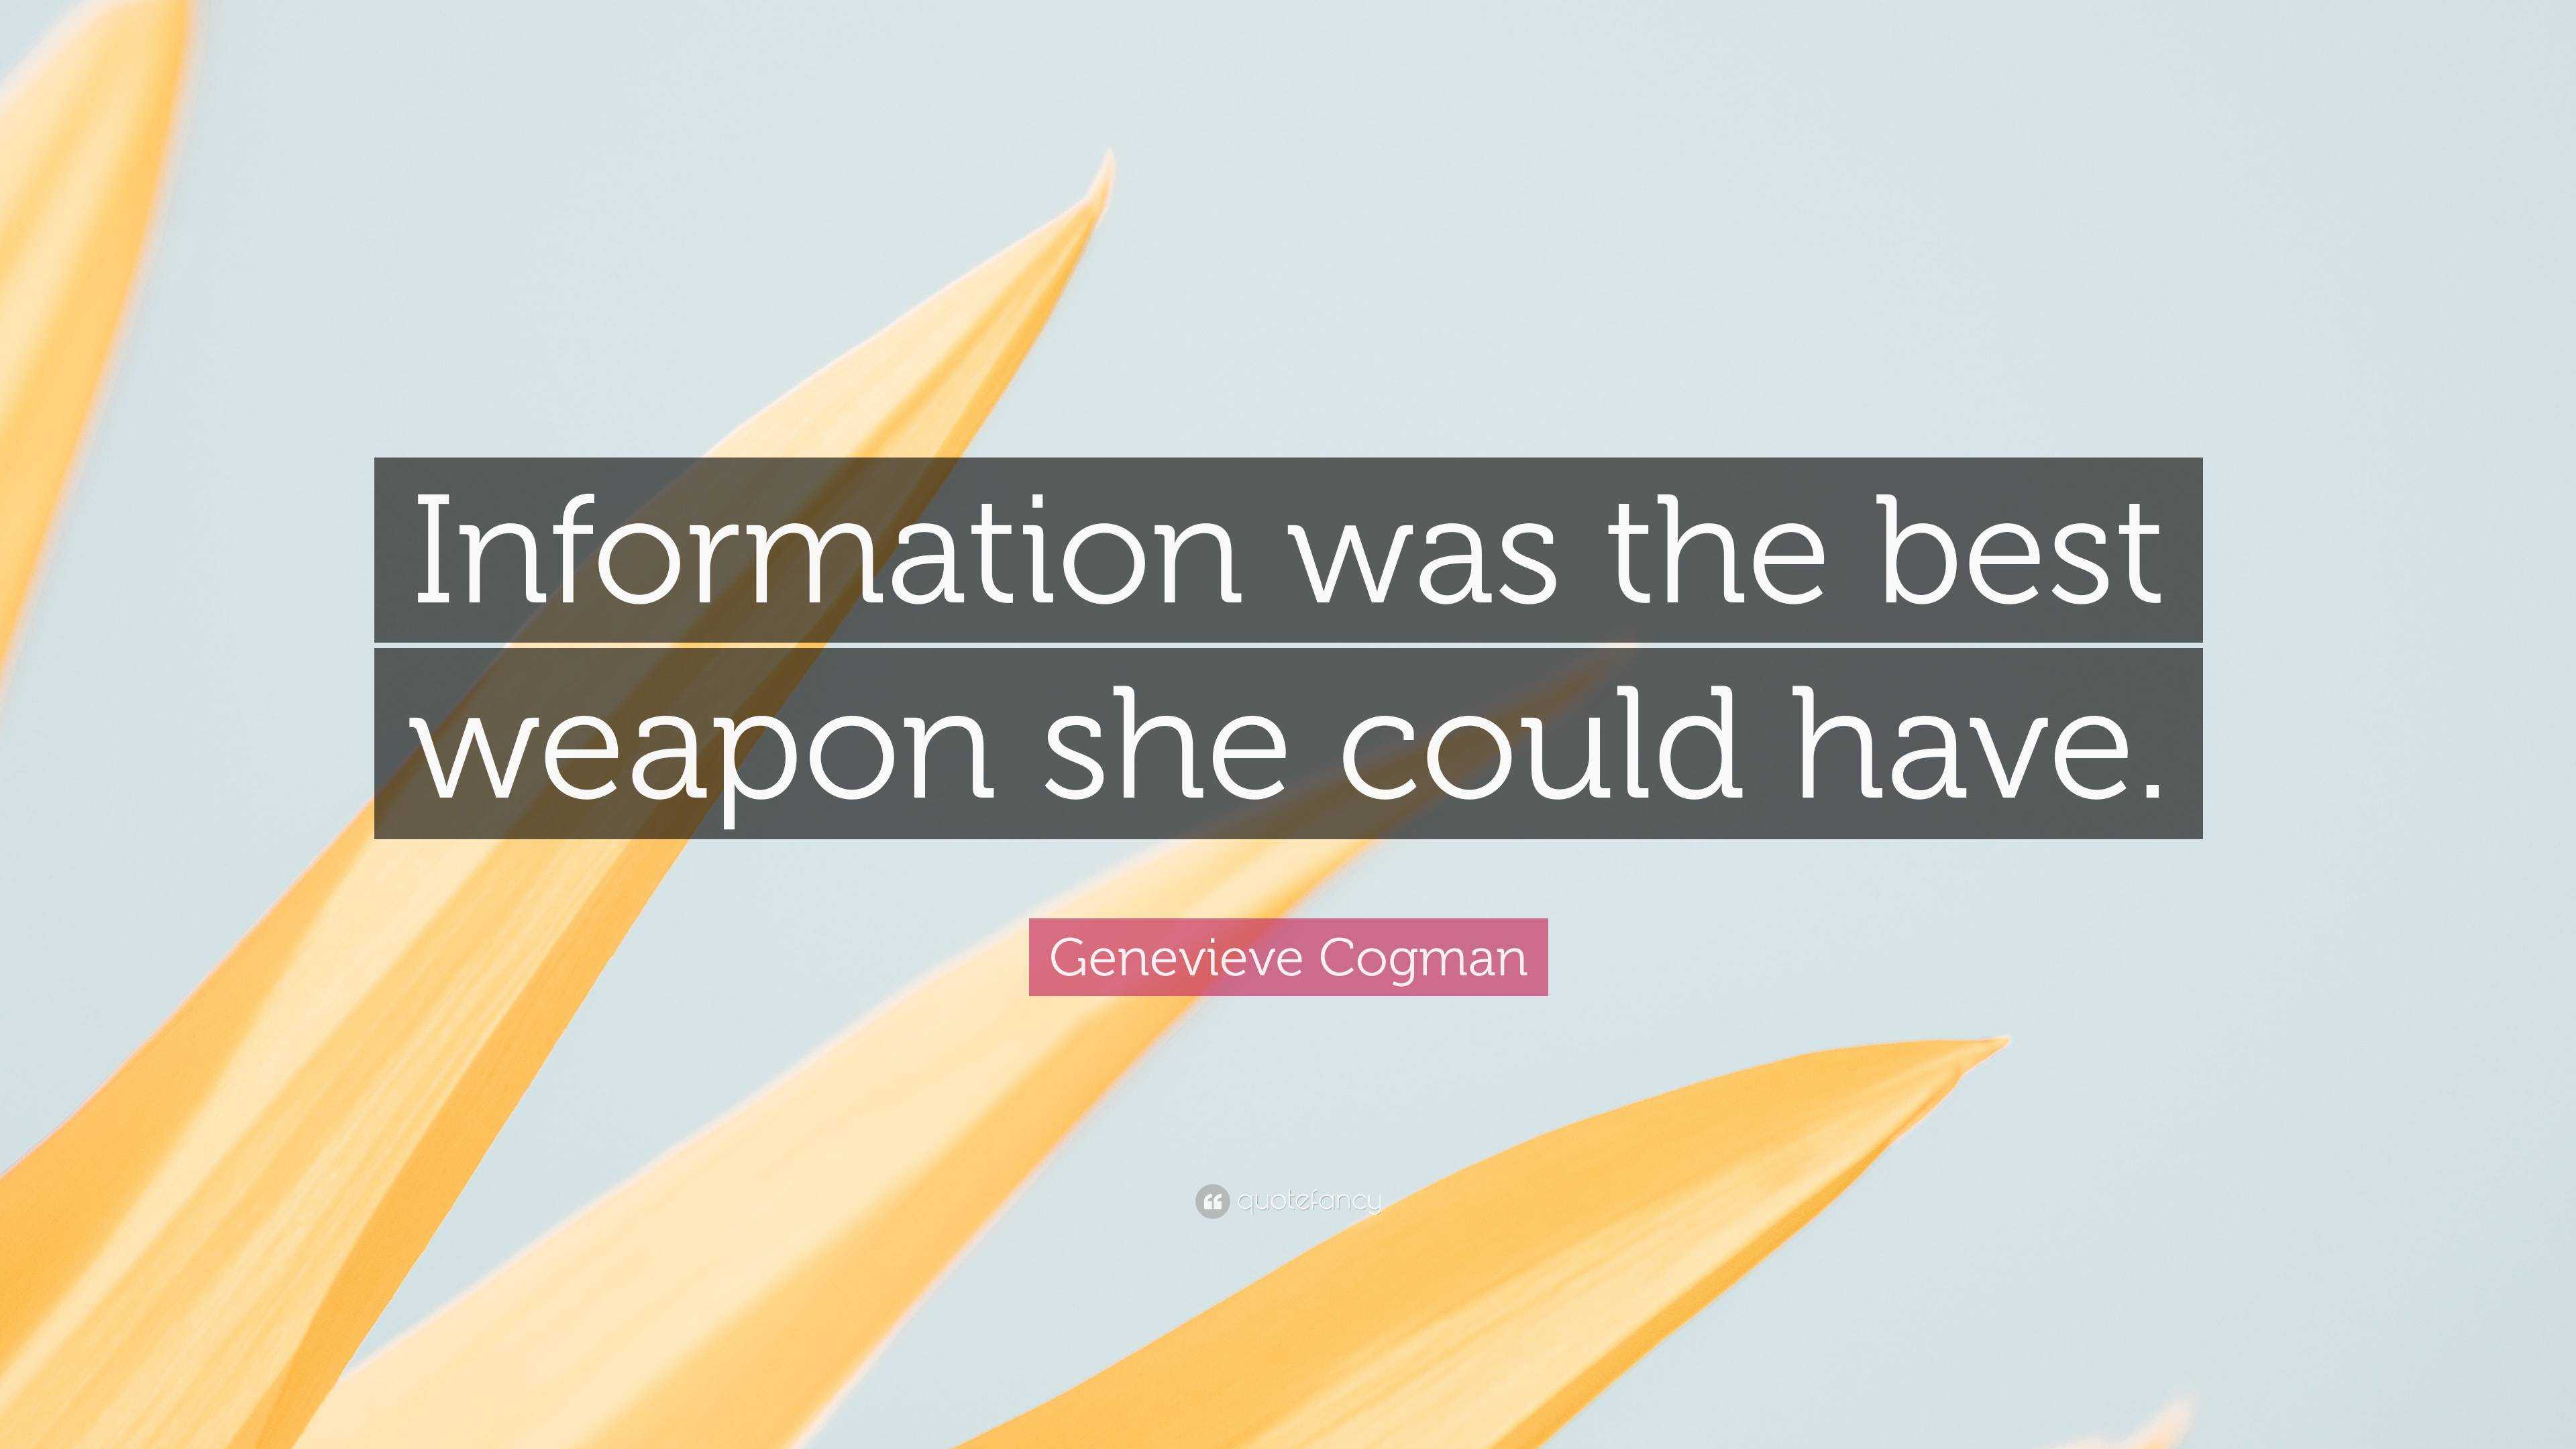 Genevieve Cogman Quote: “Information was the best weapon she could